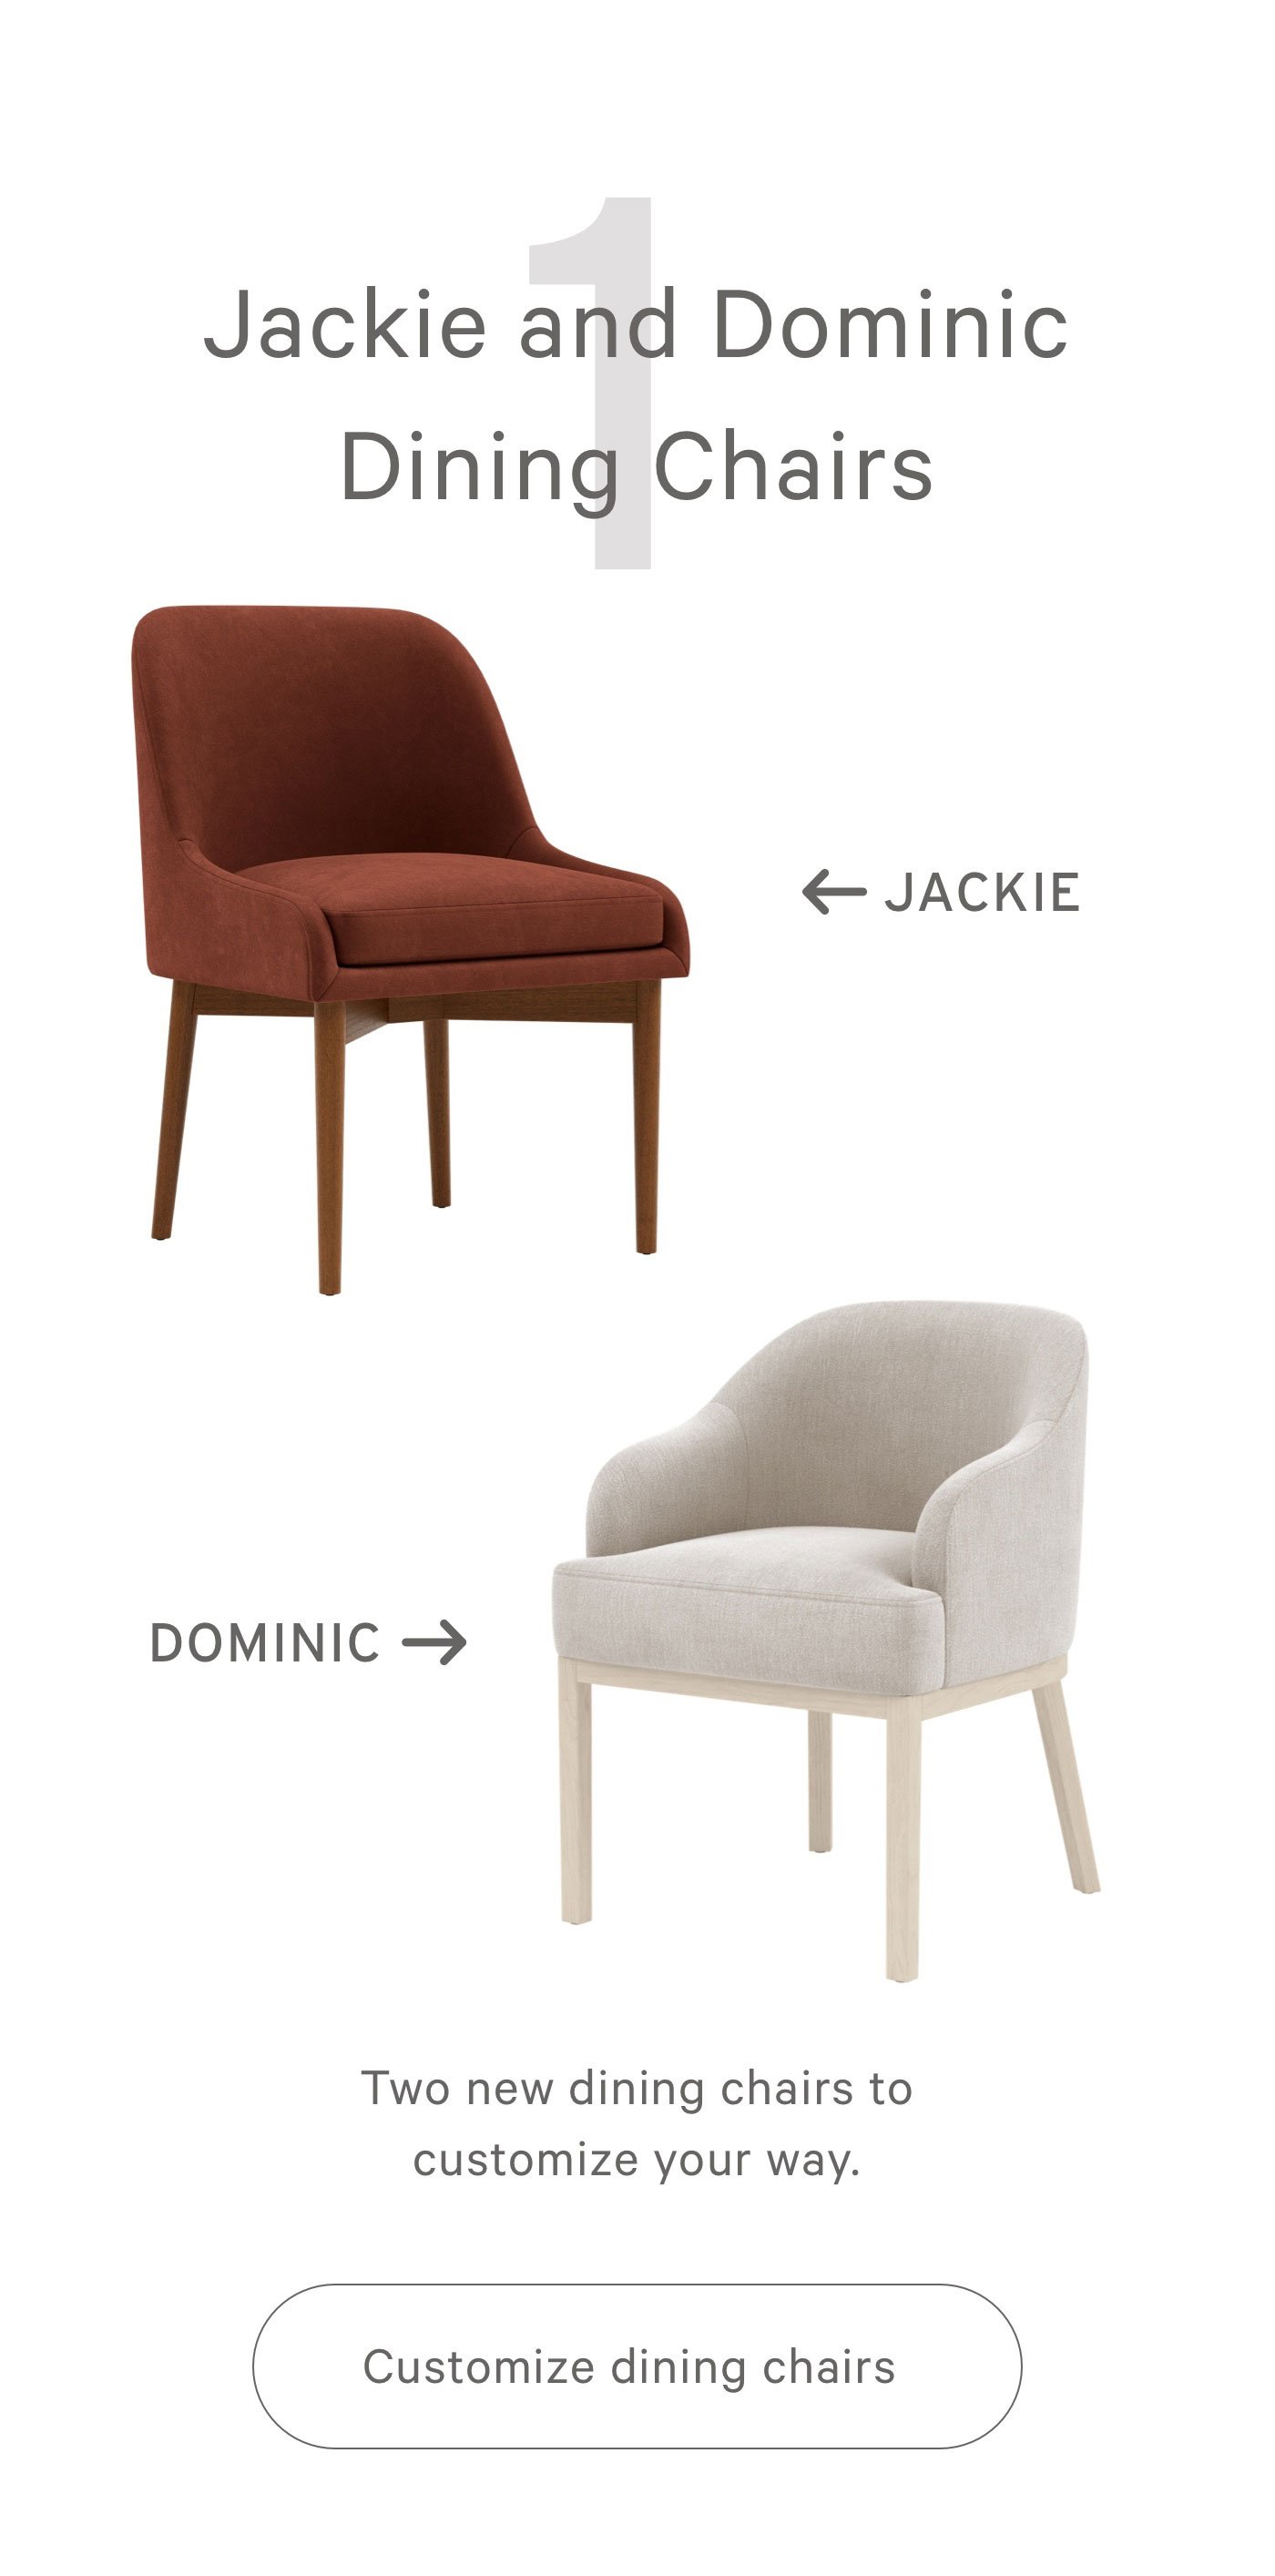 1 Jackie and Dining Dining Chairs Two new dining chairs to customize your way. 